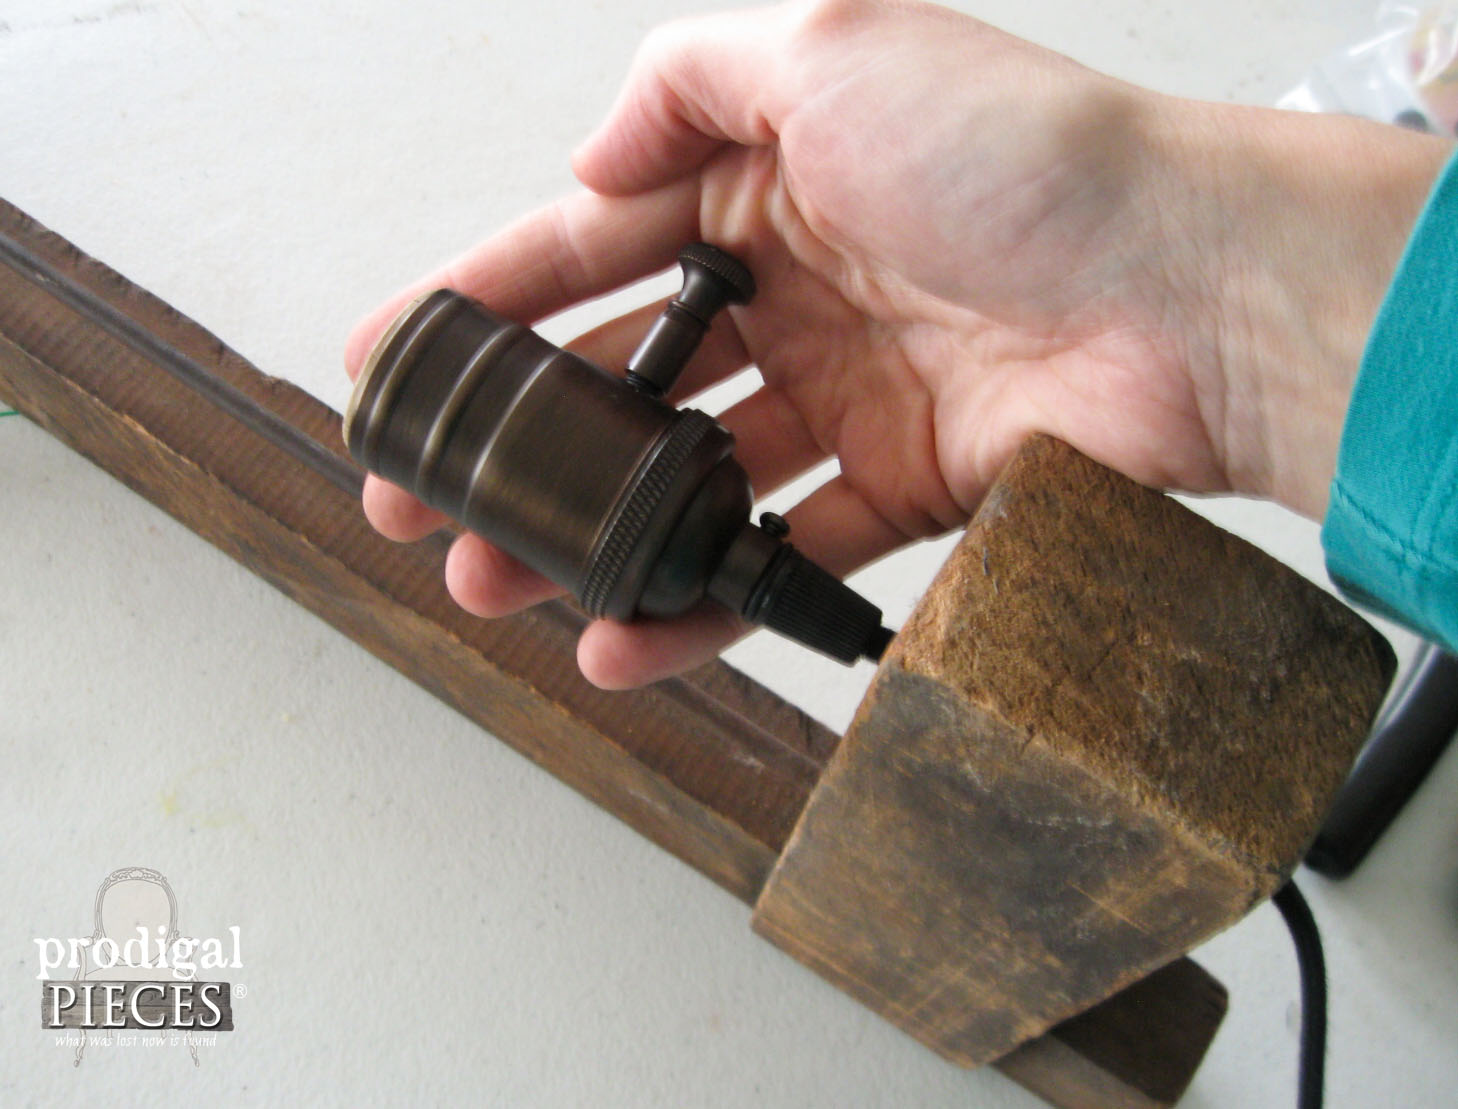 Making Antique Farmhouse Clamp into Sconce by Prodigal Pieces | www.prodigalpieces.com